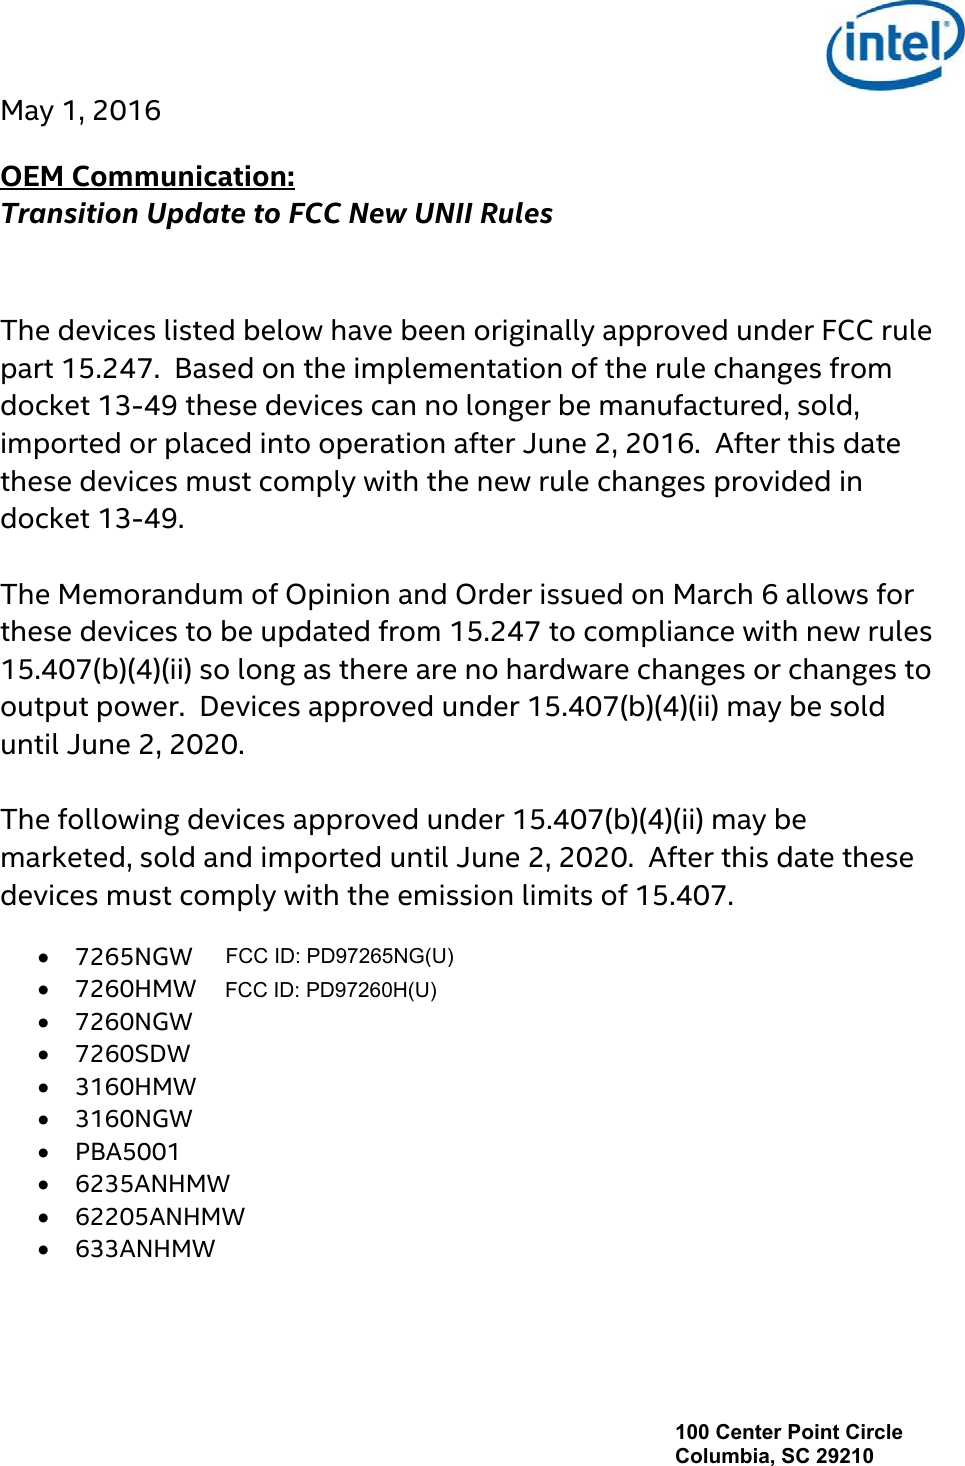 100 Center Point Circle Columbia, SC 29210  May 1, 2016  OEM Communication:   Transition Update to FCC New UNII Rules    The devices listed below have been originally approved under FCC rule part 15.247.  Based on the implementation of the rule changes from docket 13-49 these devices can no longer be manufactured, sold, imported or placed into operation after June 2, 2016.  After this date these devices must comply with the new rule changes provided in docket 13-49.  The Memorandum of Opinion and Order issued on March 6 allows for these devices to be updated from 15.247 to compliance with new rules 15.407(b)(4)(ii) so long as there are no hardware changes or changes to output power.  Devices approved under 15.407(b)(4)(ii) may be sold until June 2, 2020.  The following devices approved under 15.407(b)(4)(ii) may be marketed, sold and imported until June 2, 2020.  After this date these devices must comply with the emission limits of 15.407.   7265NGW  7260HMW  7260NGW  7260SDW  3160HMW  3160NGW  PBA5001  6235ANHMW  62205ANHMW  633ANHMW FCC ID: PD97260H(U)FCC ID: PD97265NG(U)